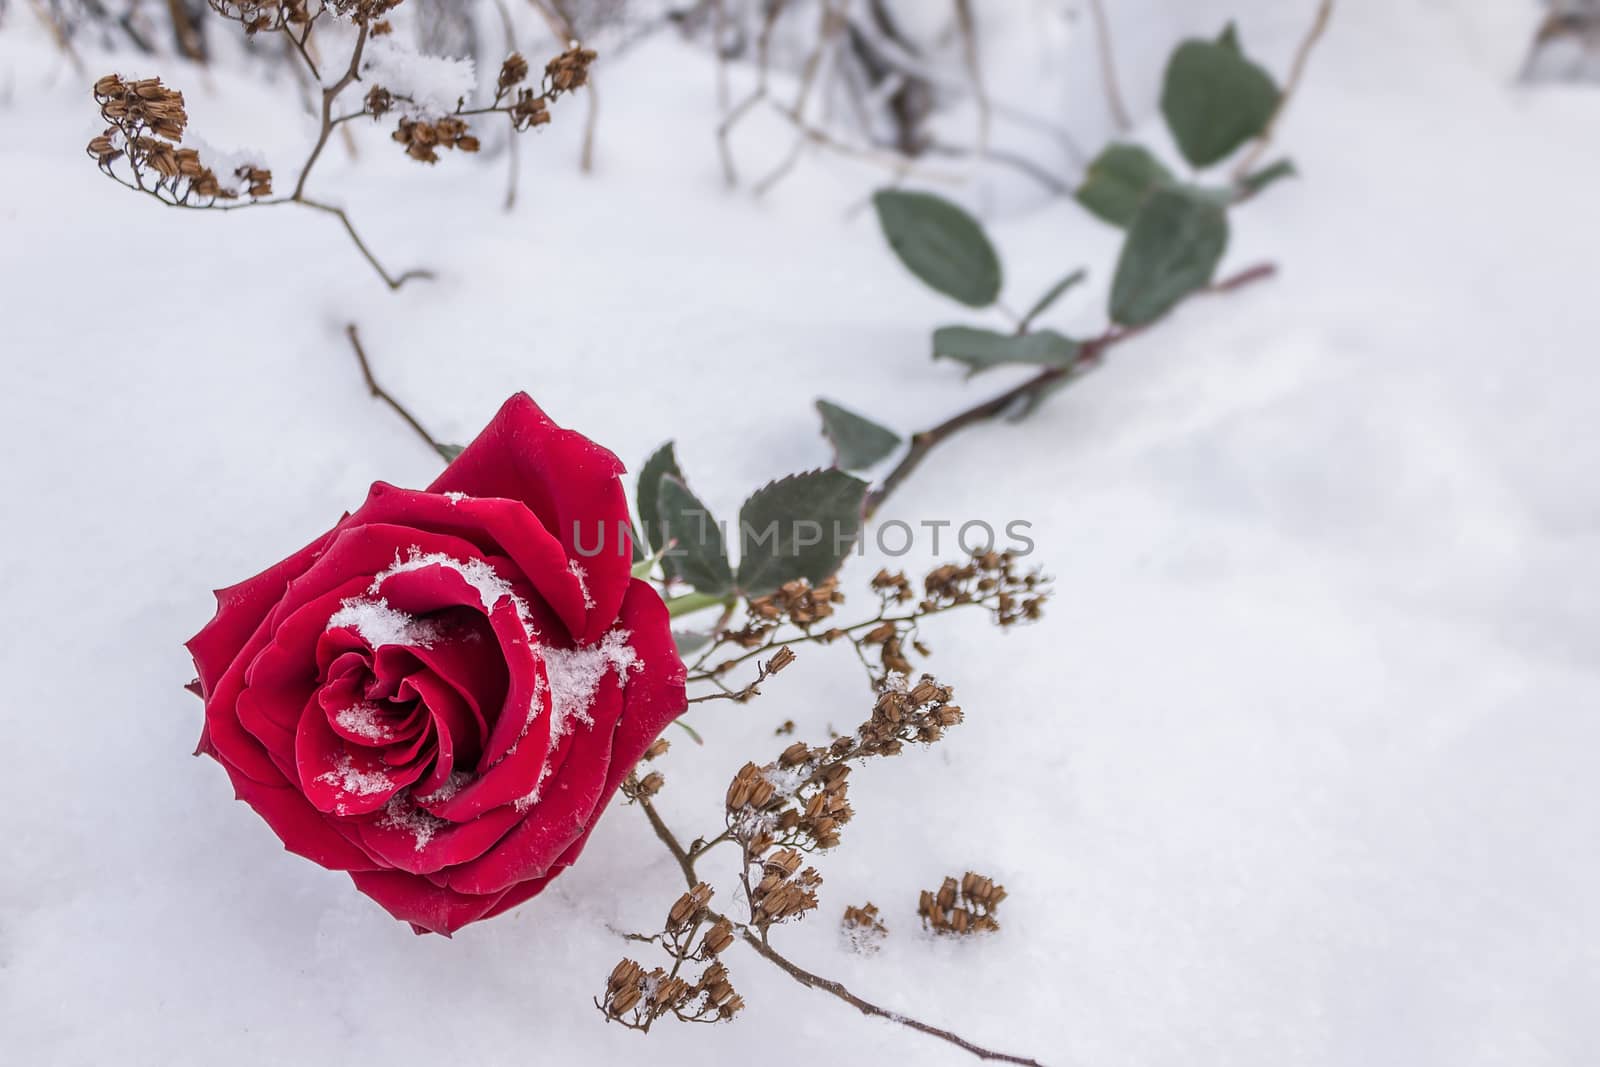 Red rose in winter and its tender petals in the snow during a wedding ceremony by Skaron